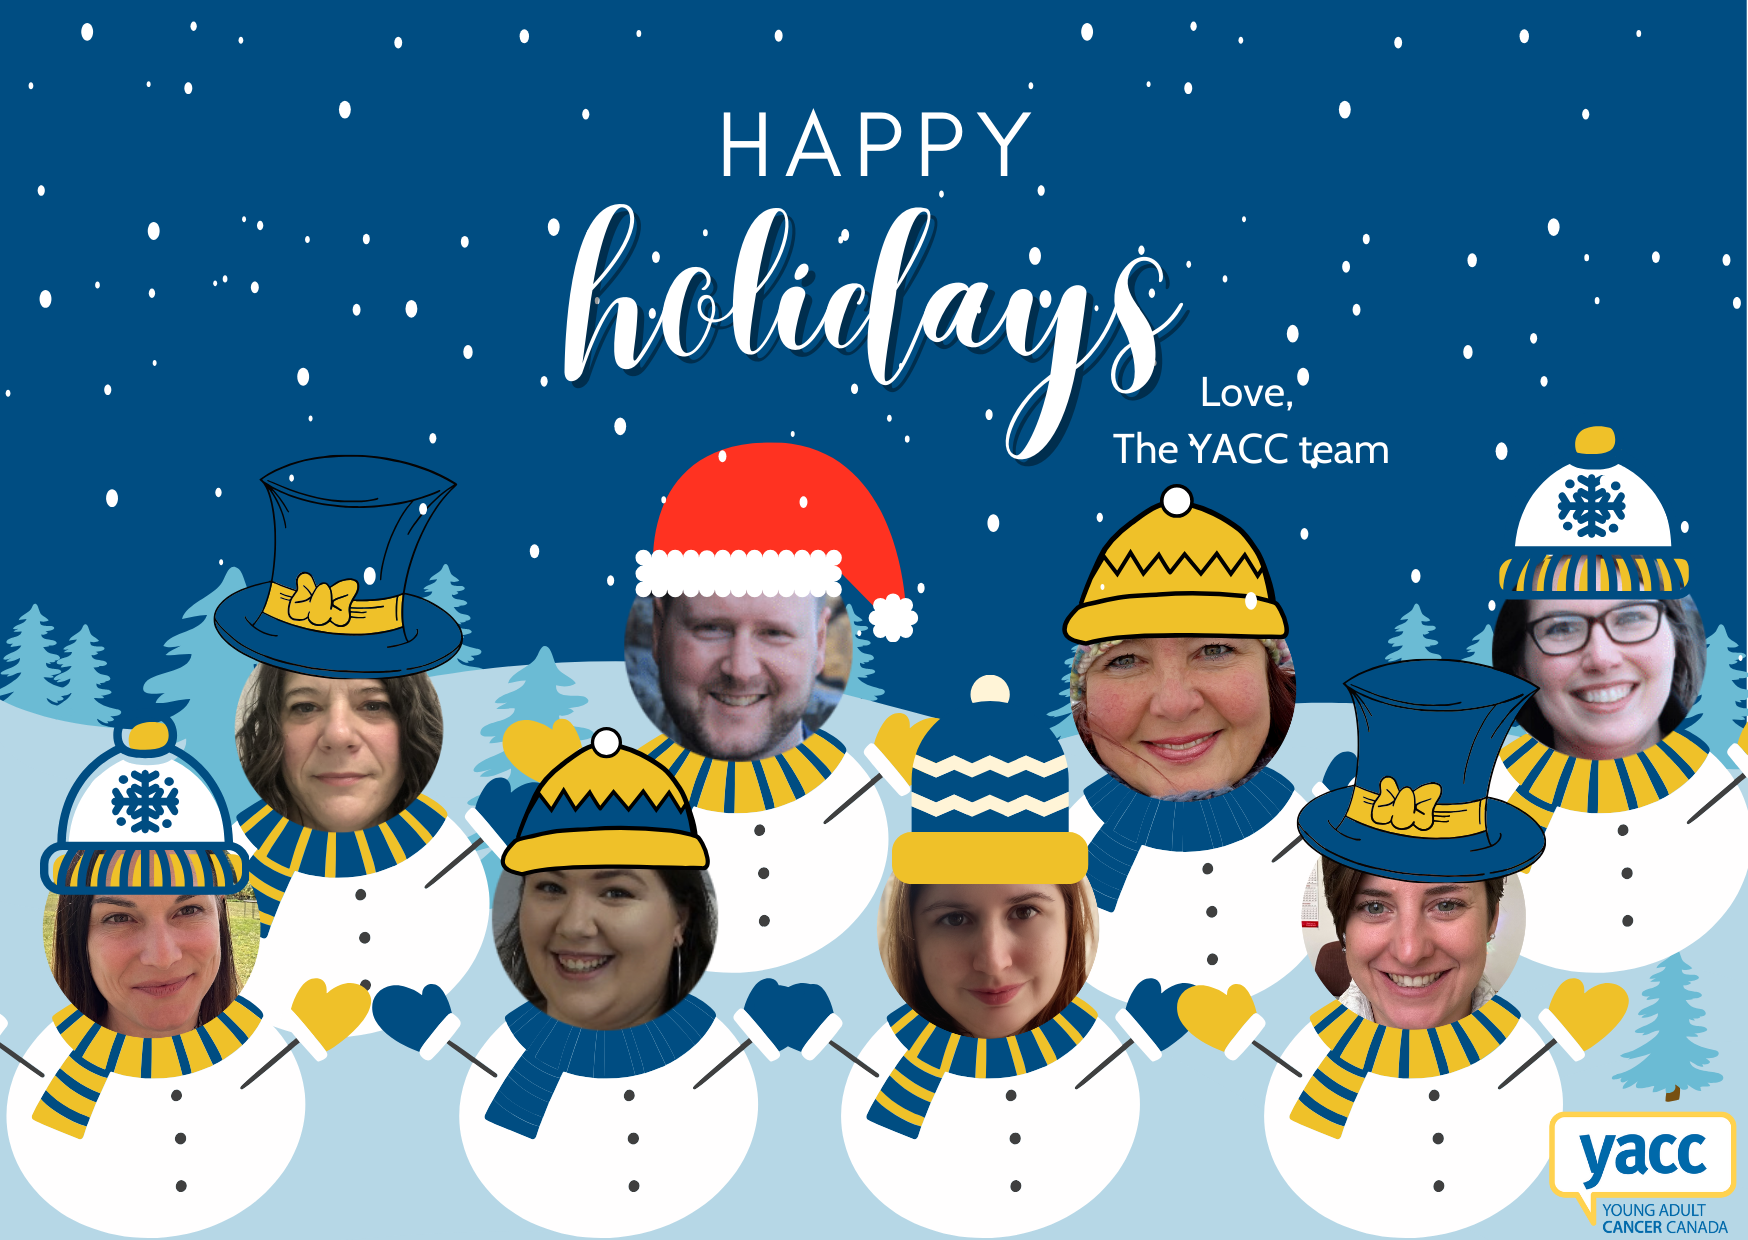 A graphic of the YACC team's faces on cartoon snowman bodies. On the top of the image, it reads "Happy holidays! Love, The YACC team." 